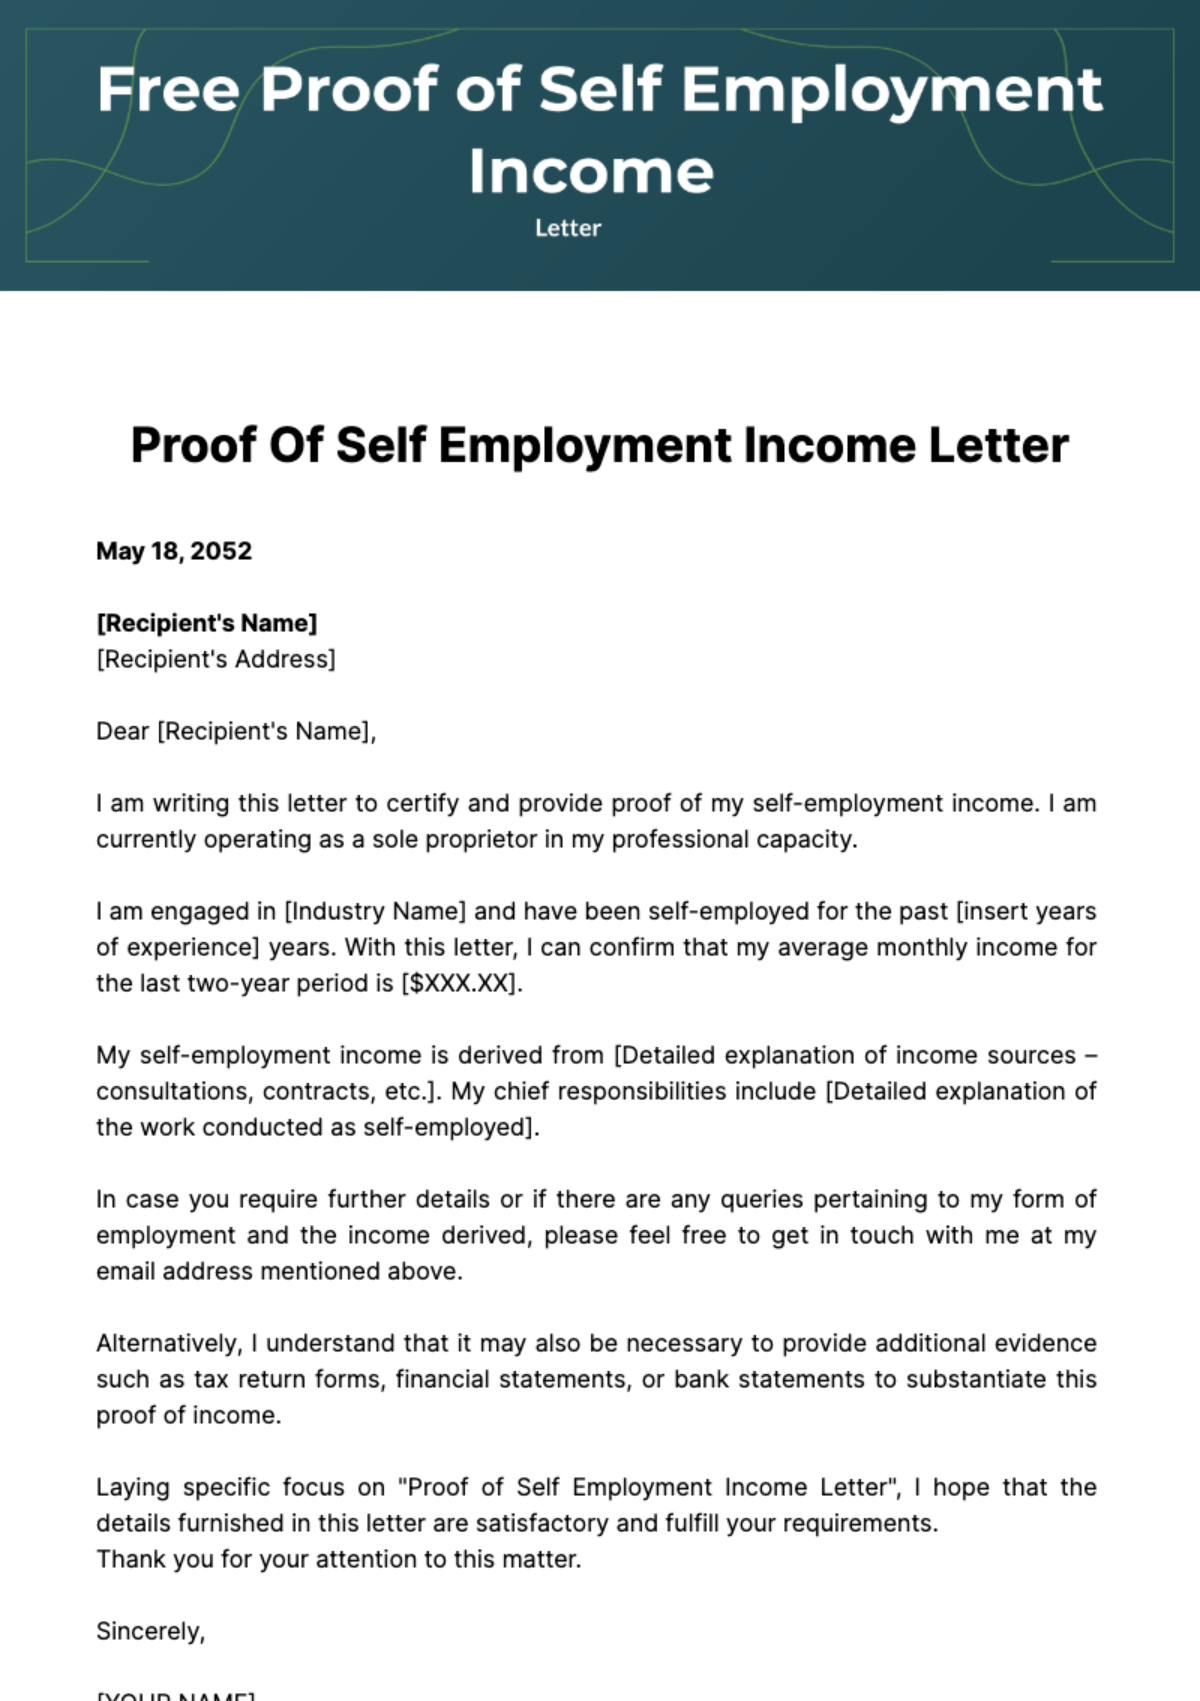 Free Proof of Self Employment Income Letter Template